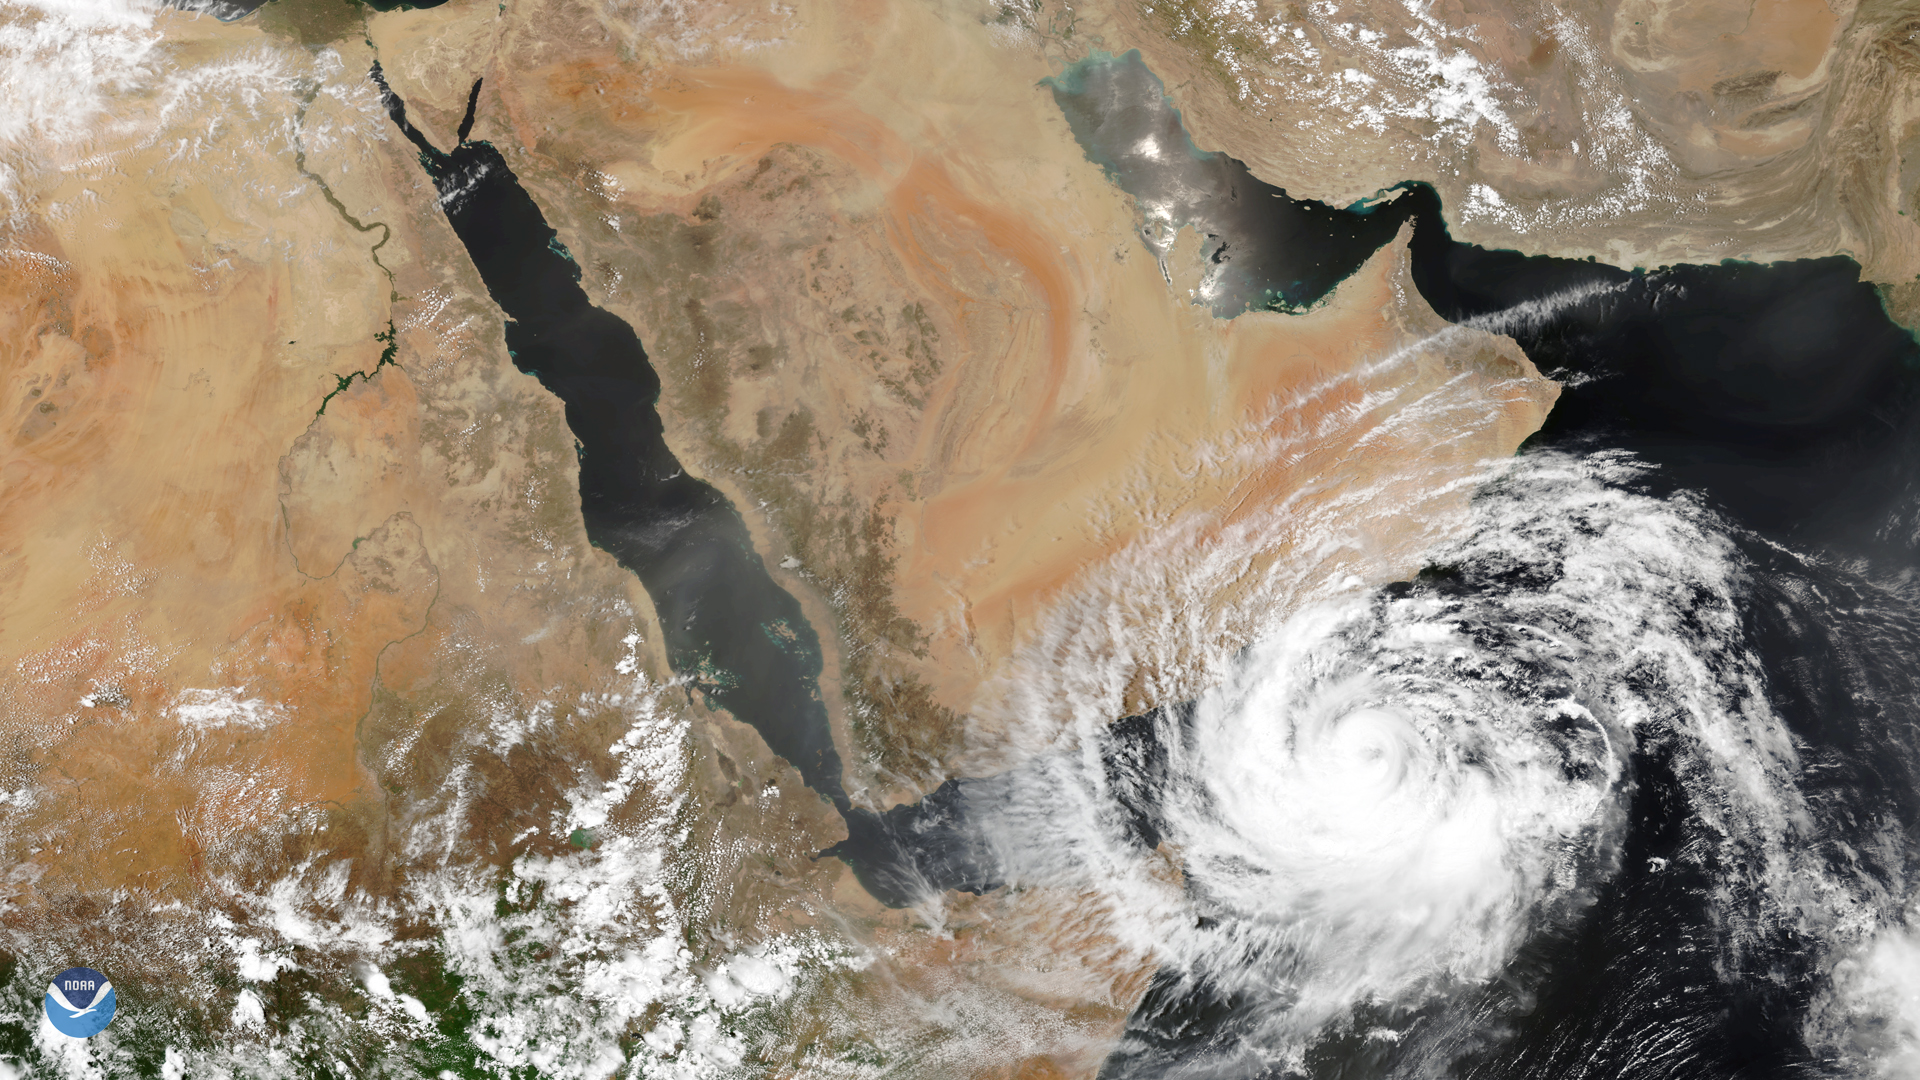 Cyclone Menuku captured by the NOAA-20 satellite approaching the southern Arabian Peninsula on May 24, 2018. Credit: NOAA National Environmental Satellite, Data, and Information Service (NESDIS)